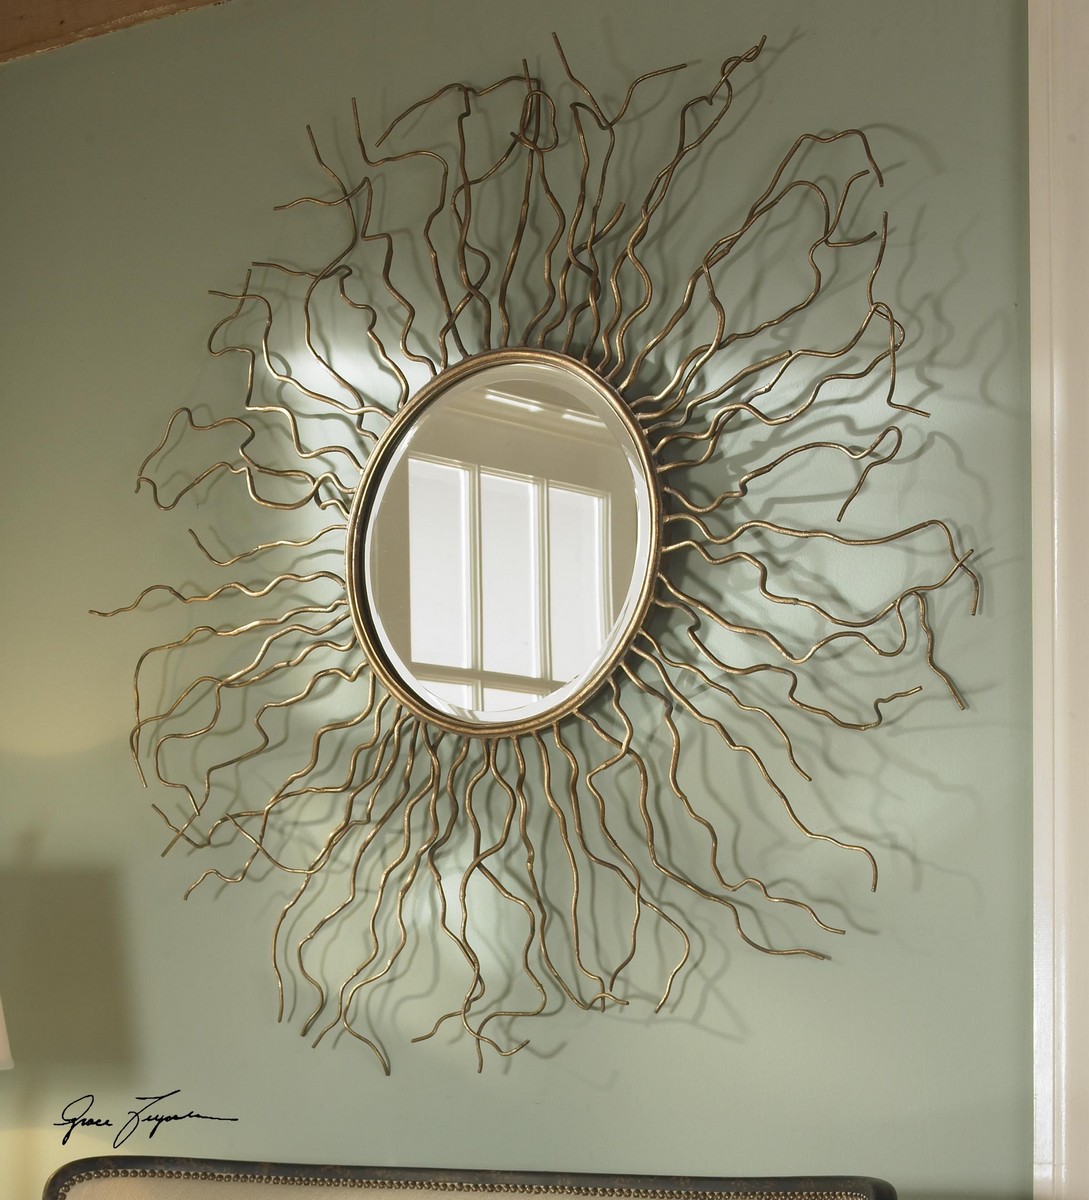 Uttermost Amadora Mirror With Sconces